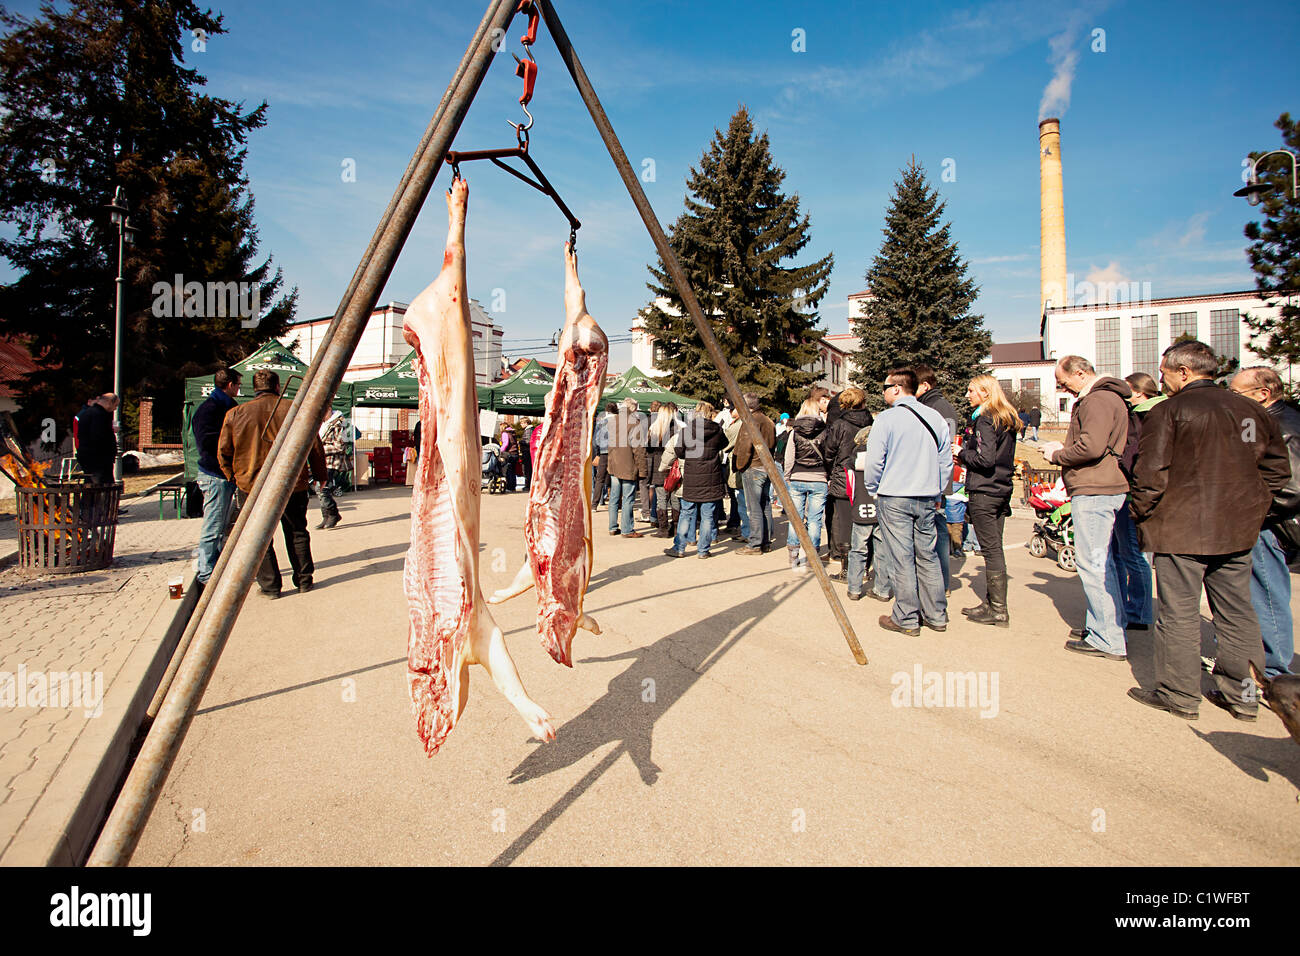 Skinned pigs hanging in front of the queue of people waiting for roasted pork Stock Photo